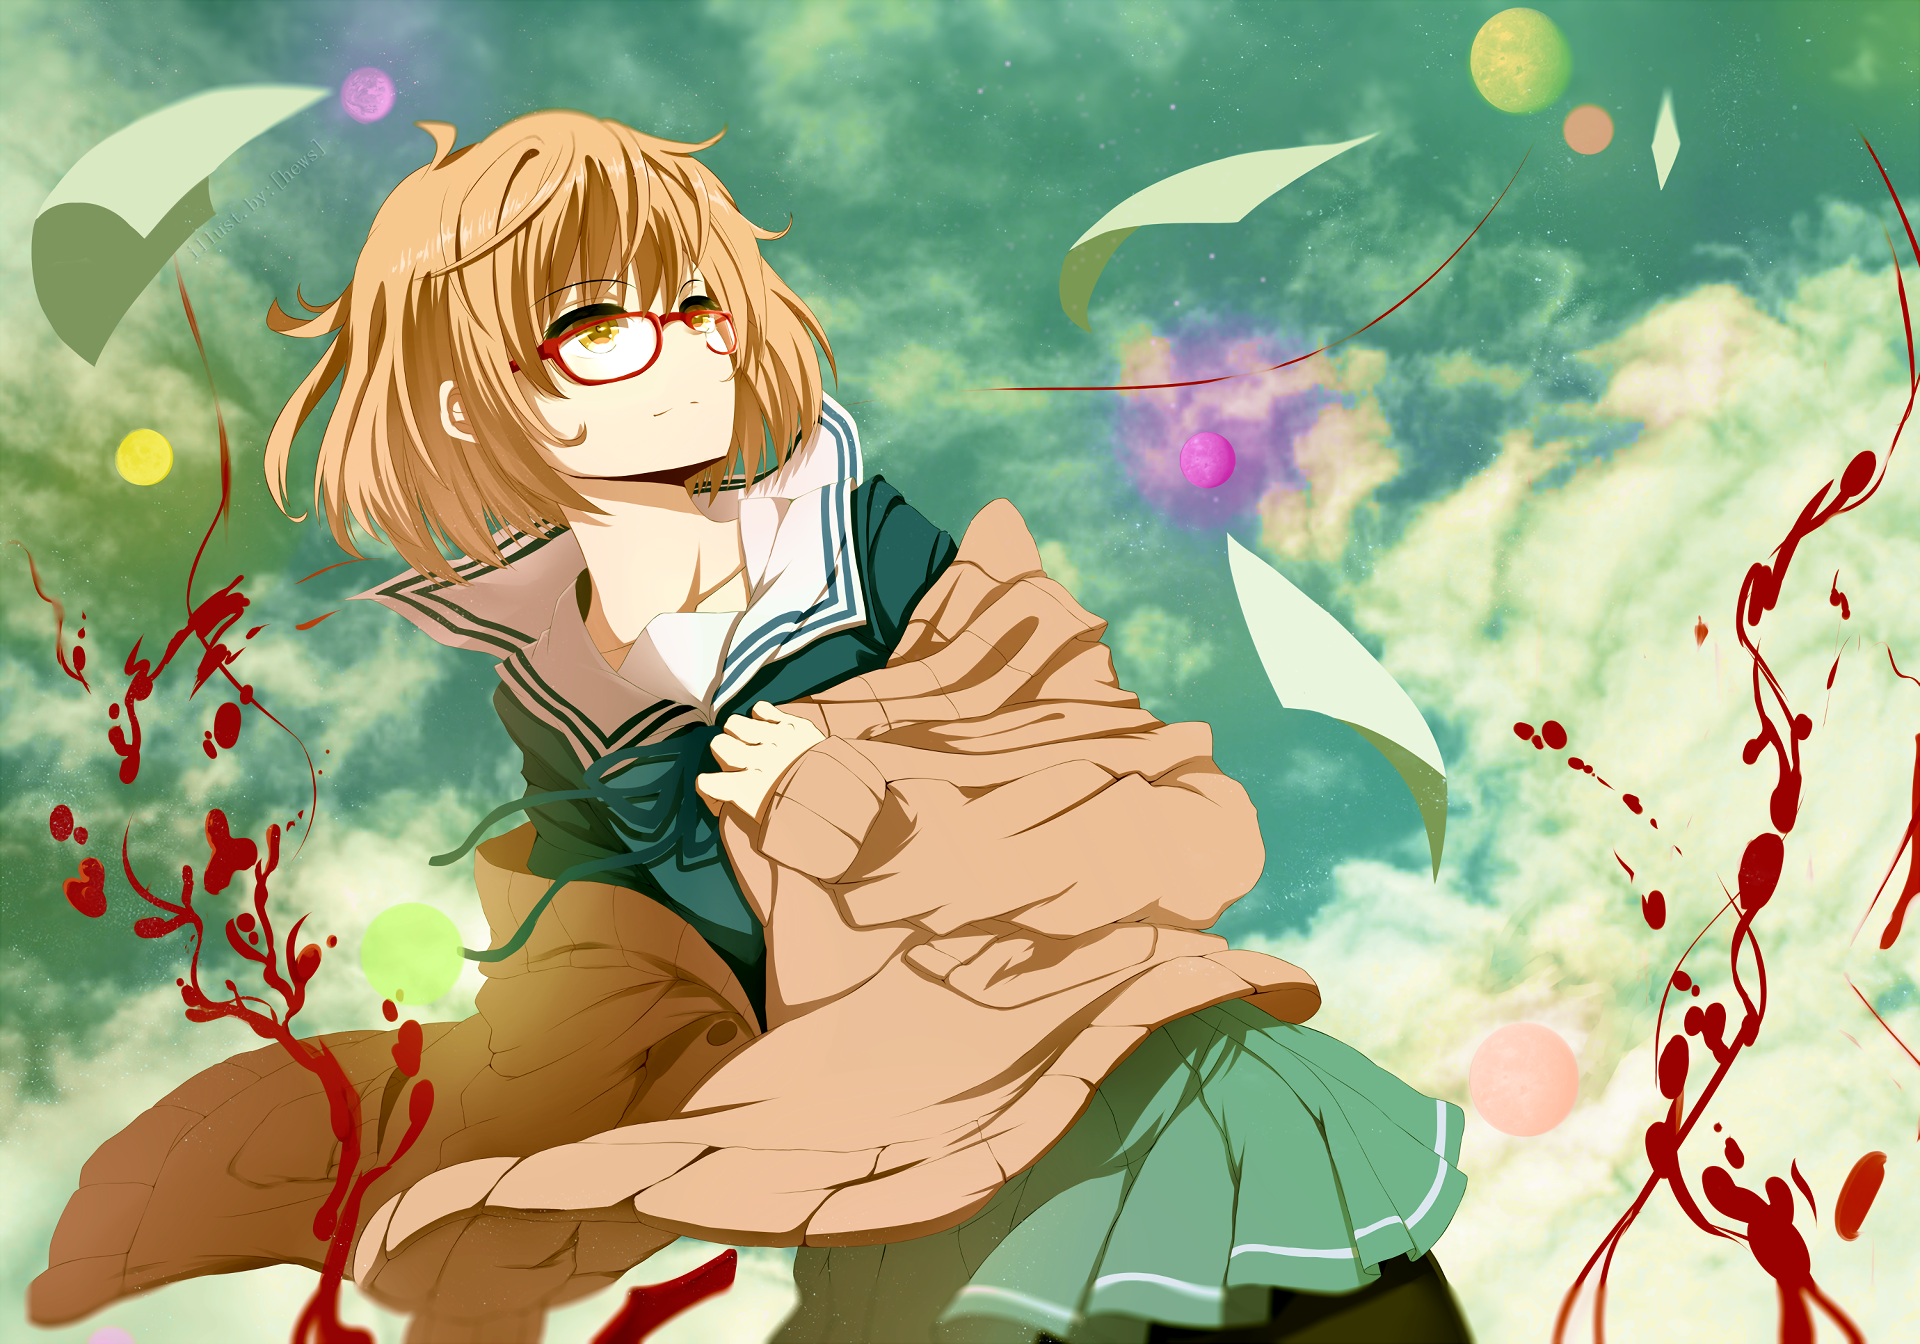 Beyond the Boundary png images